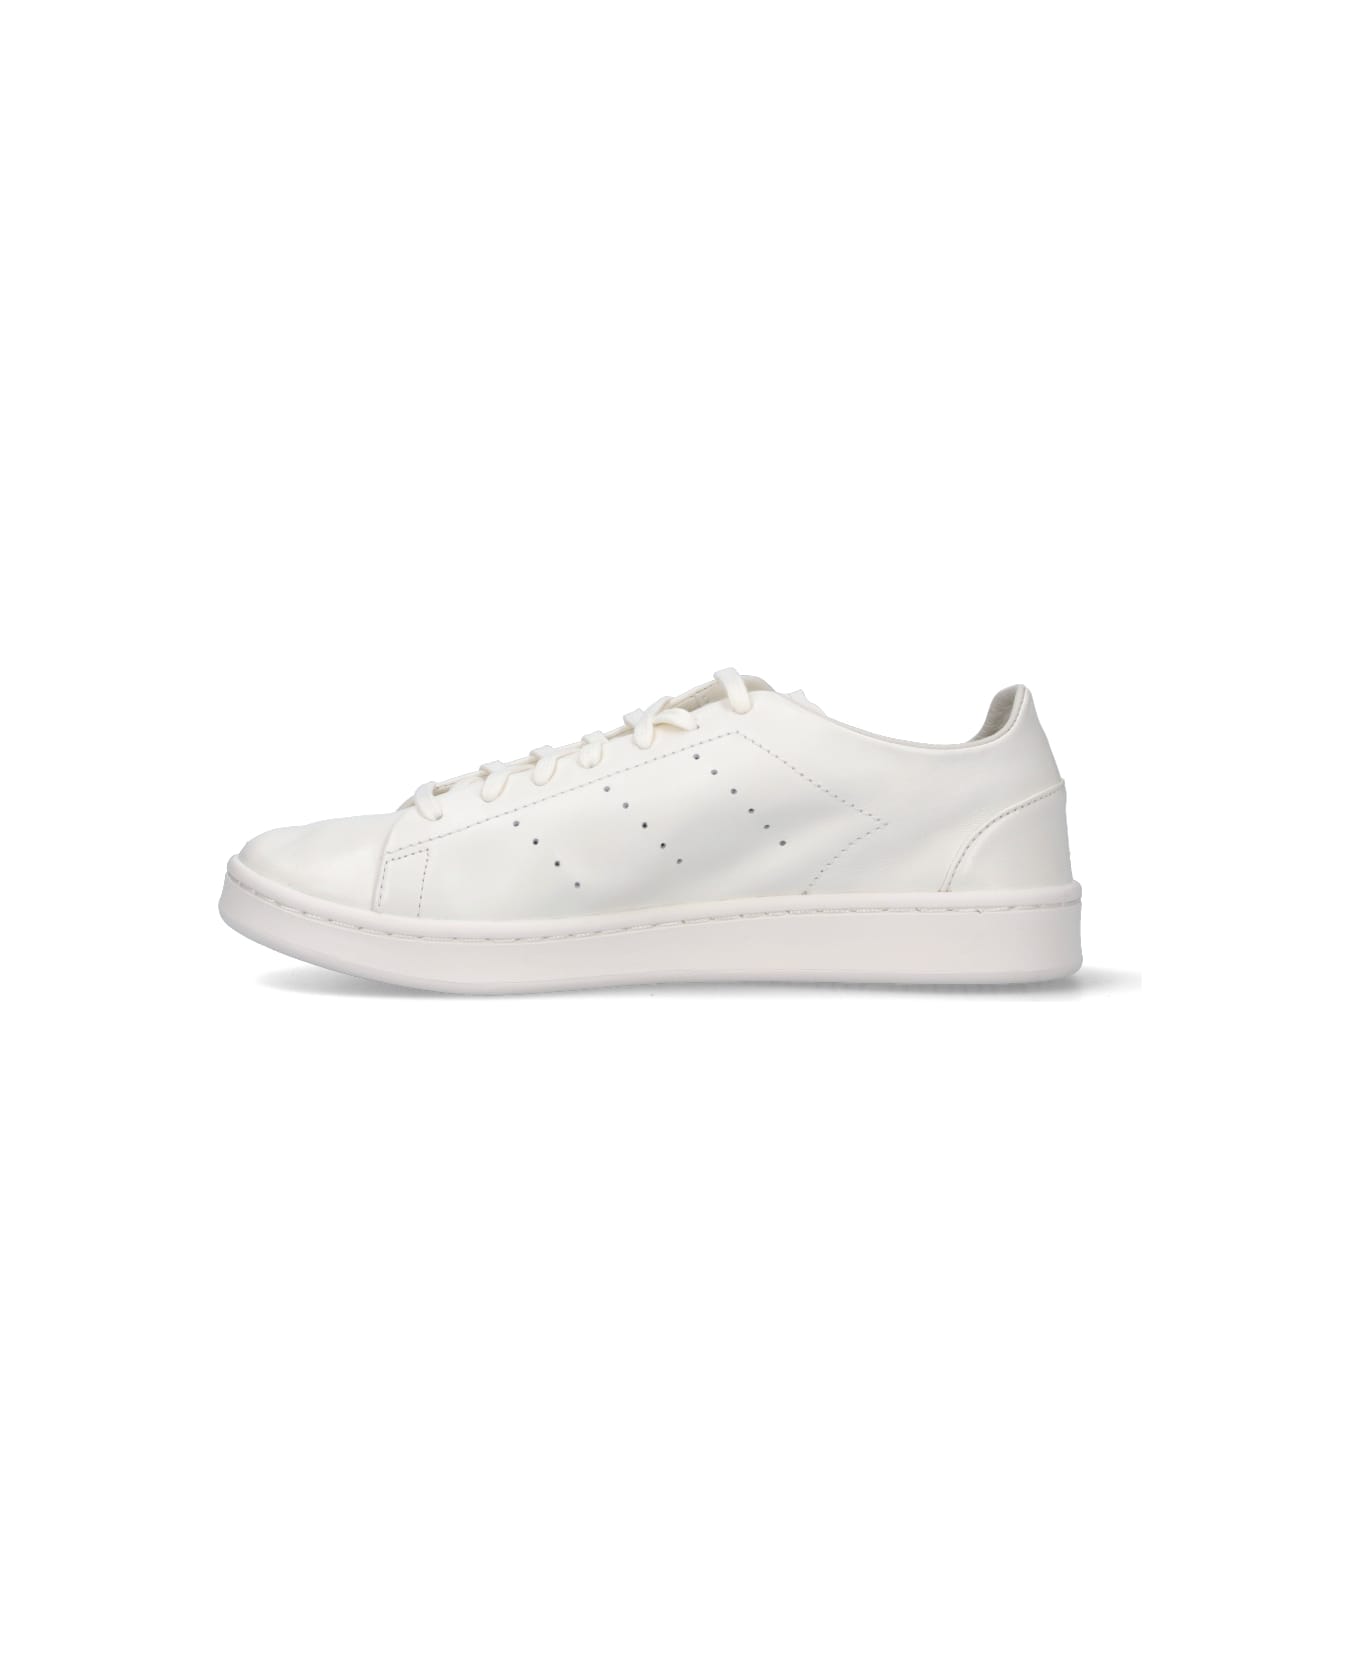 Y-3 "stan Smith" Sneakers - White スニーカー